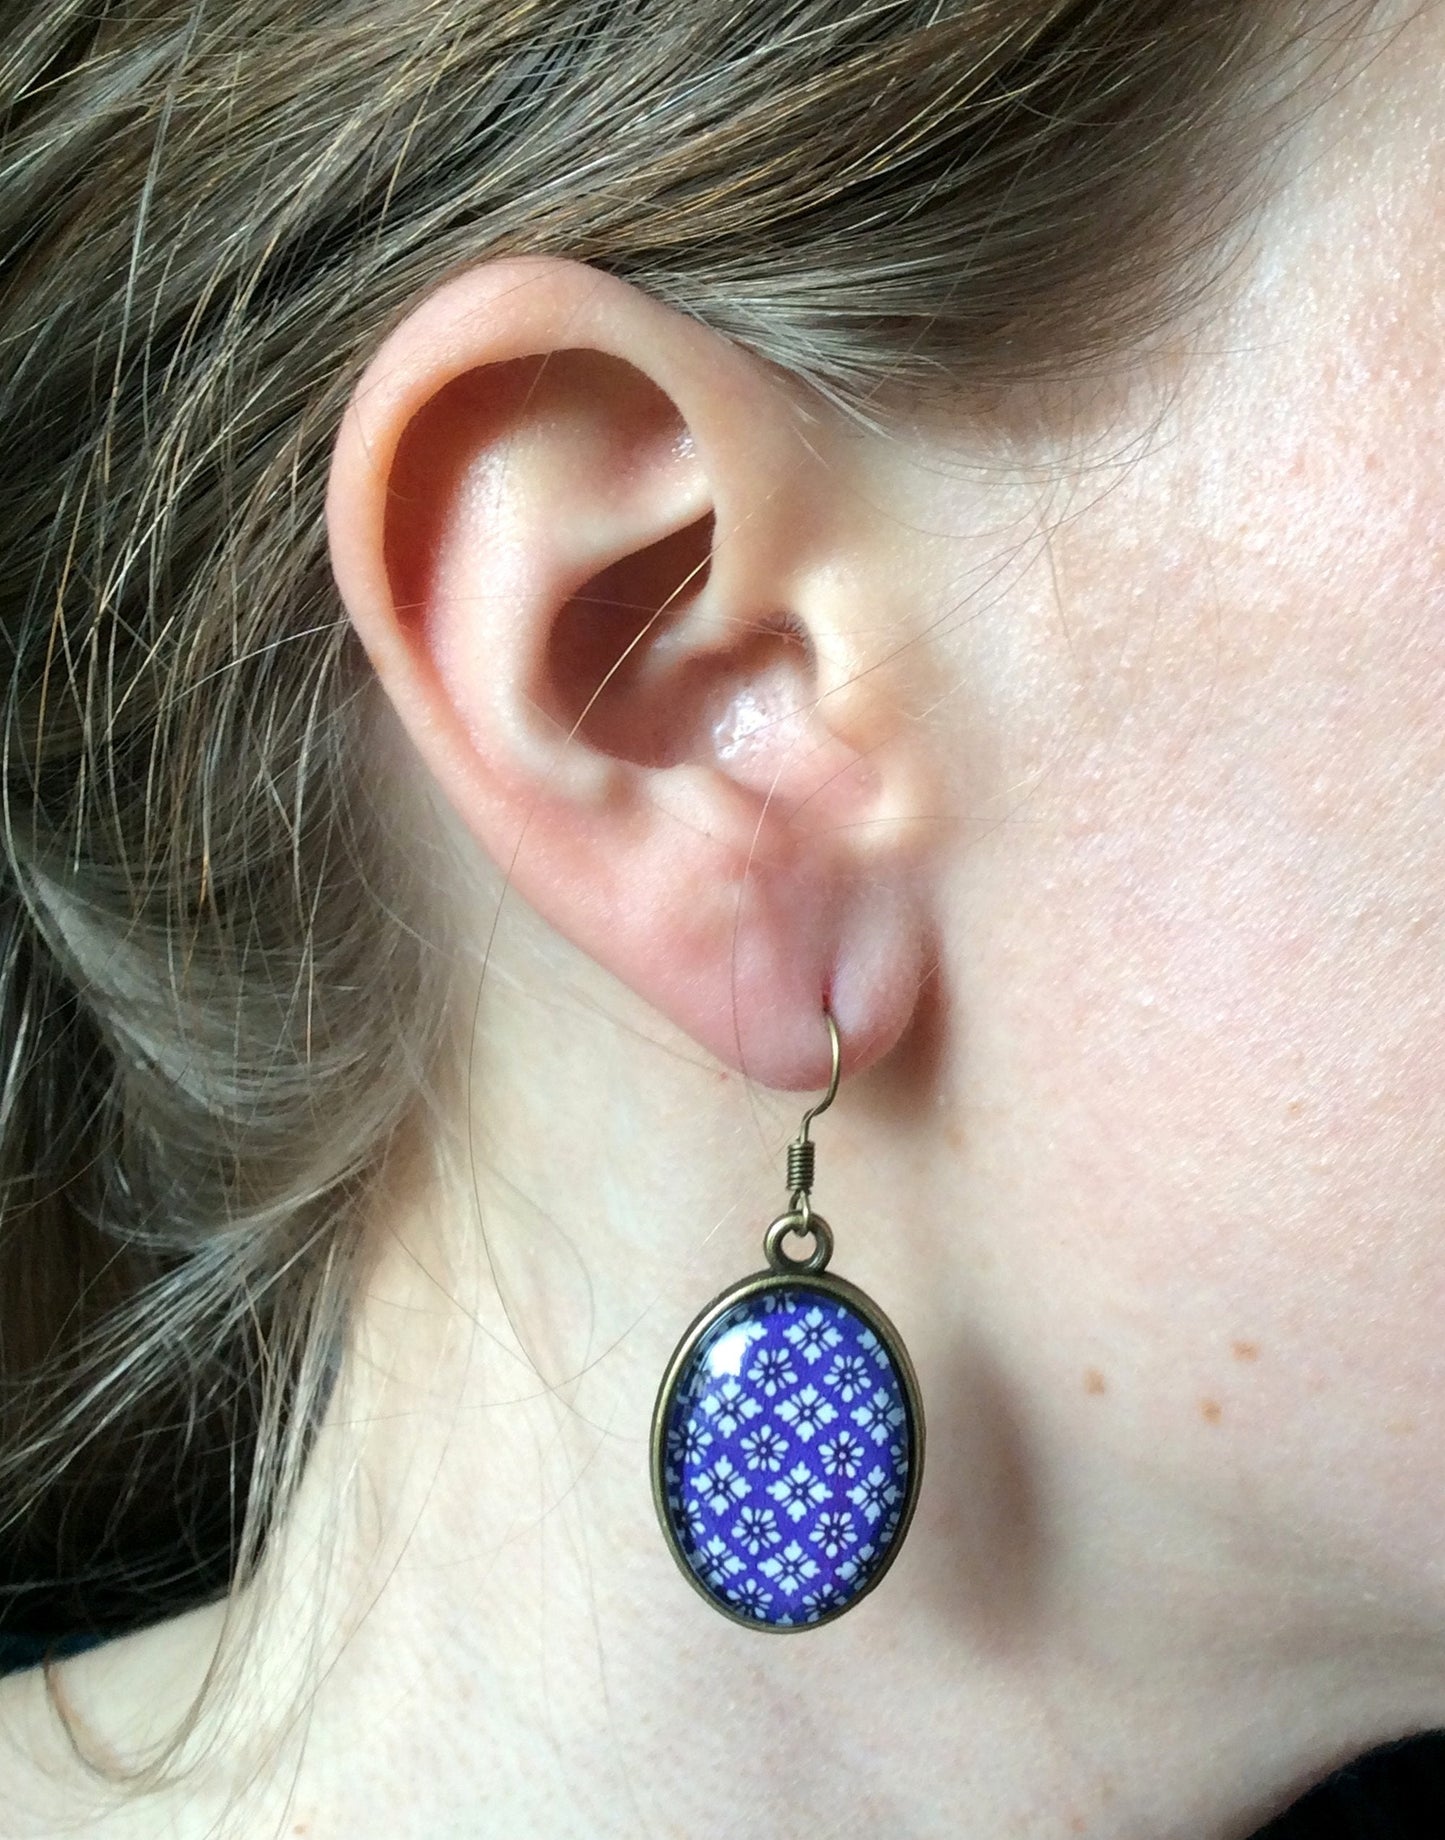 Blue and White Oval Earrings